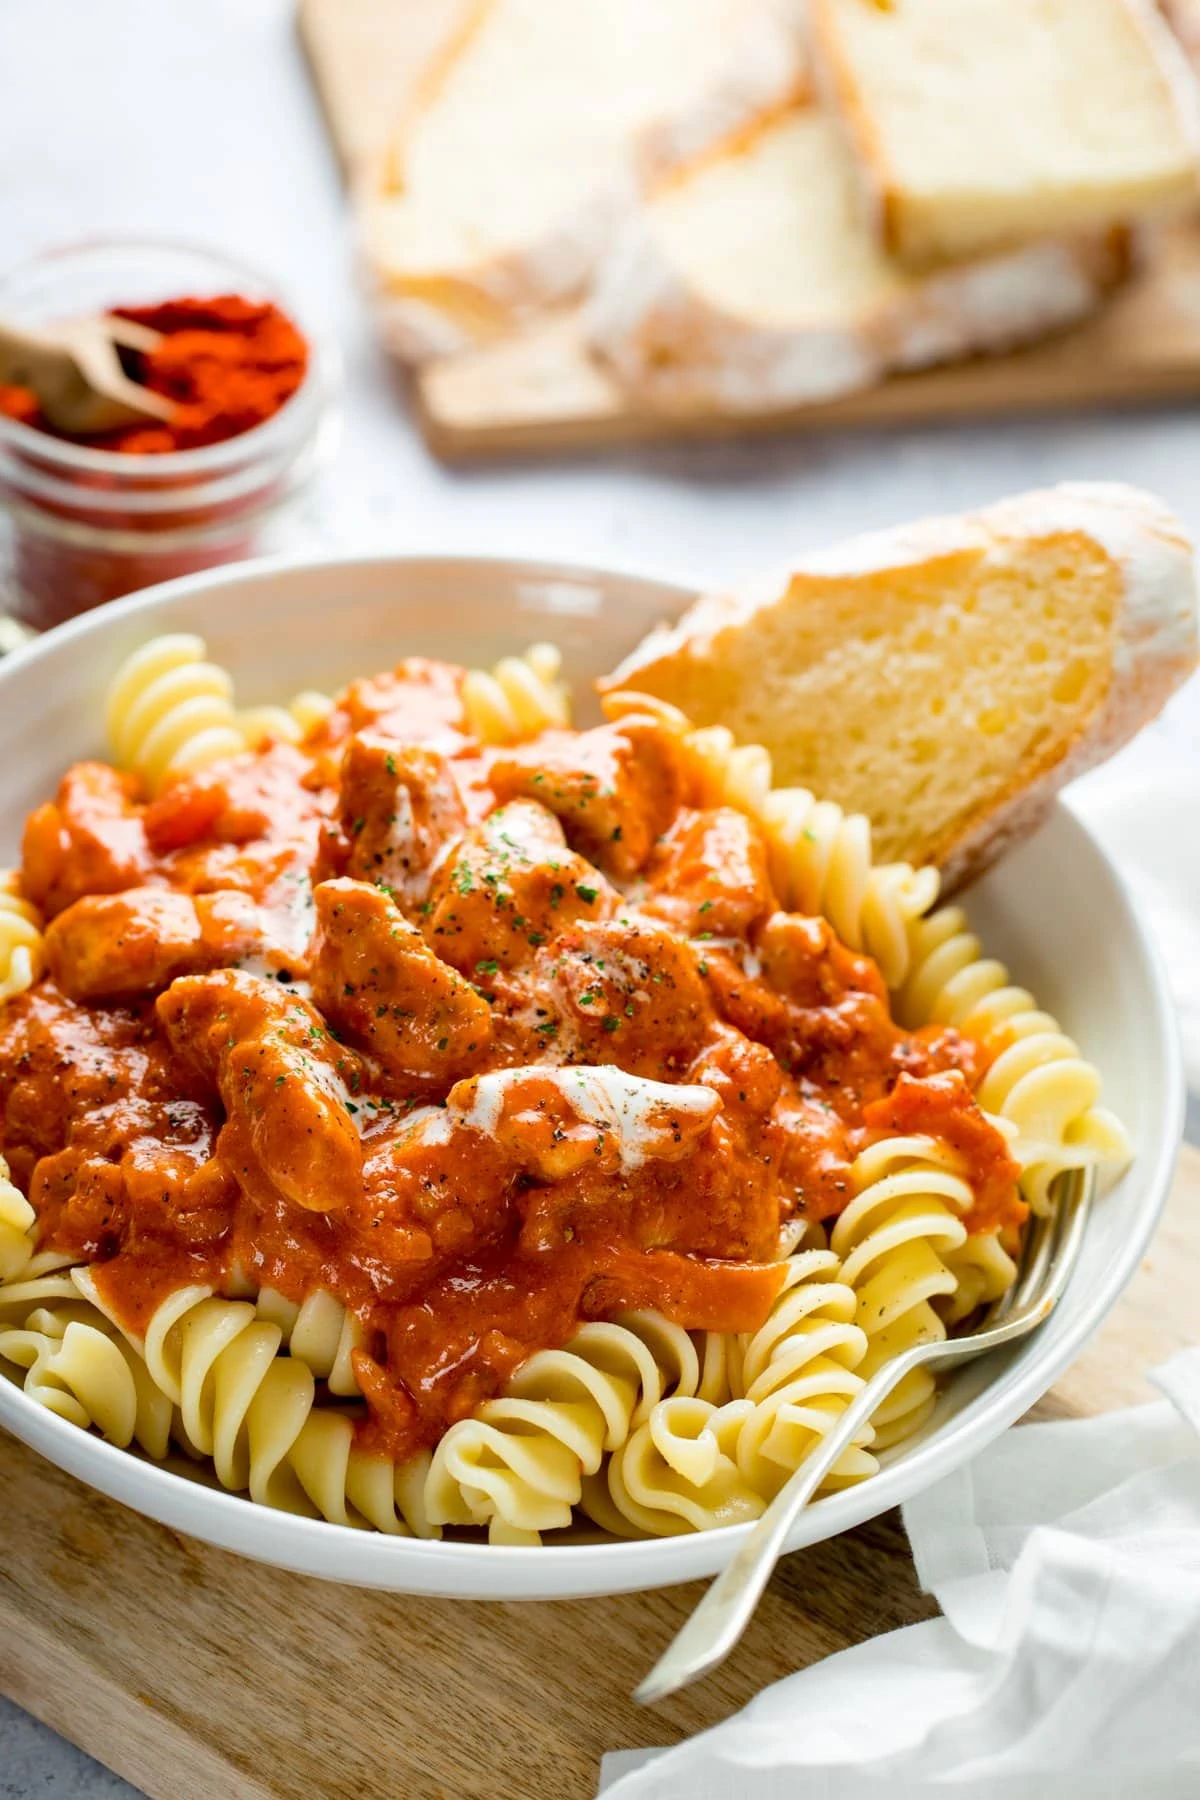 White bowl on a light background filled with pasta and chicken paprikash. Slices of bread and a jar of paprika at the top of the image.